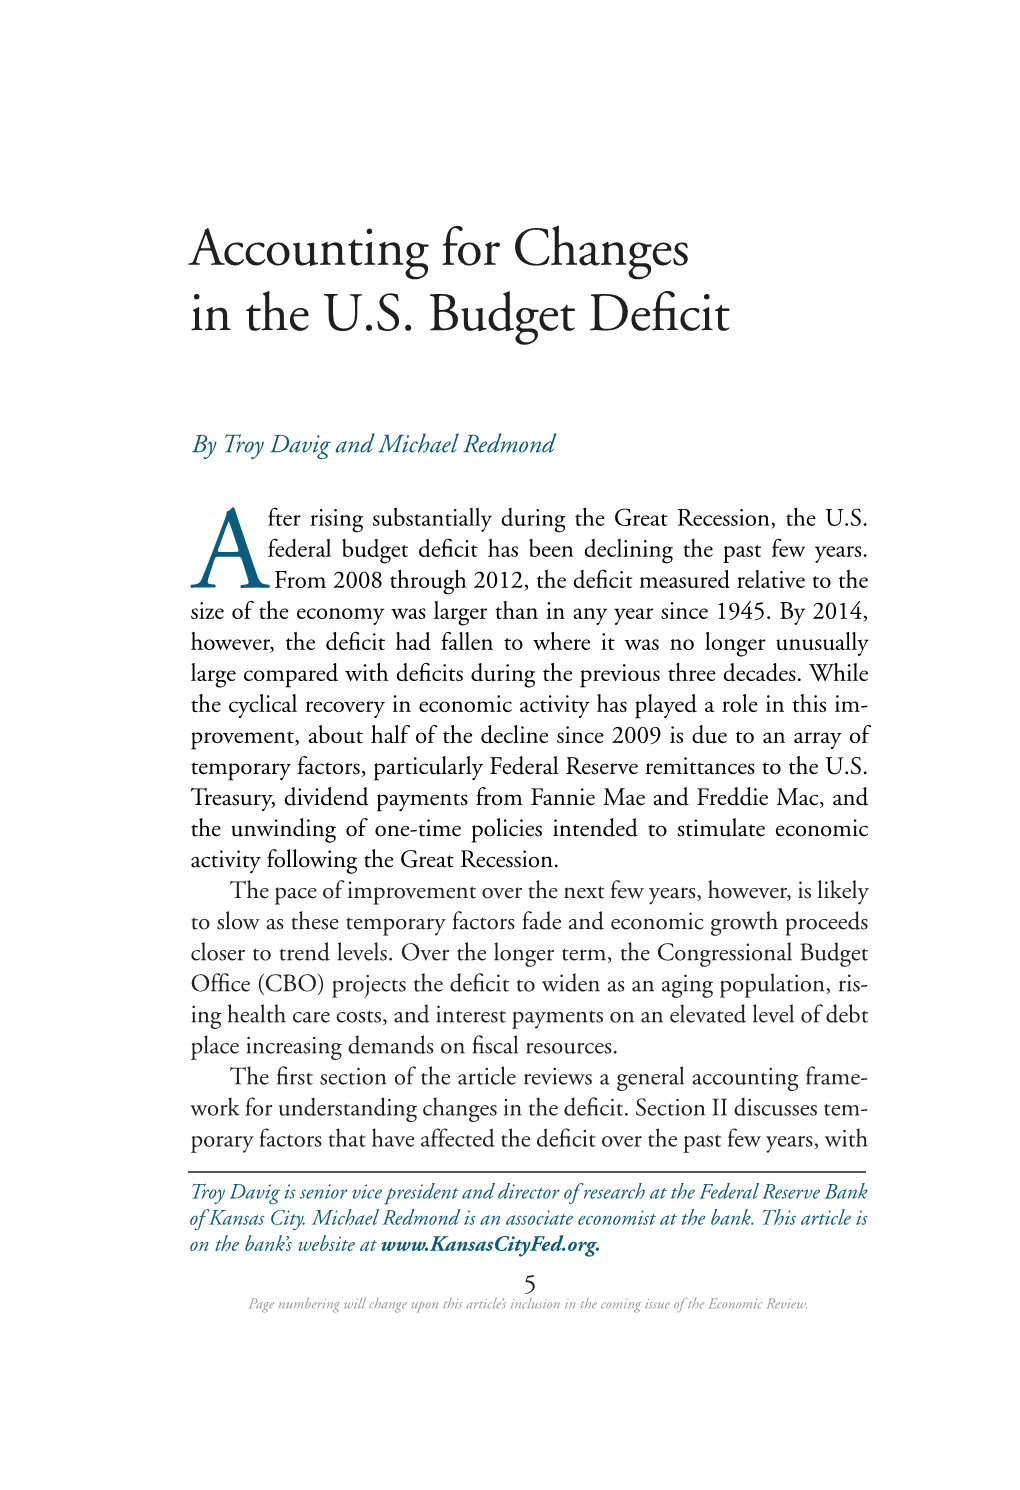 Accounting for Changes in the U.S. Budget Deficit